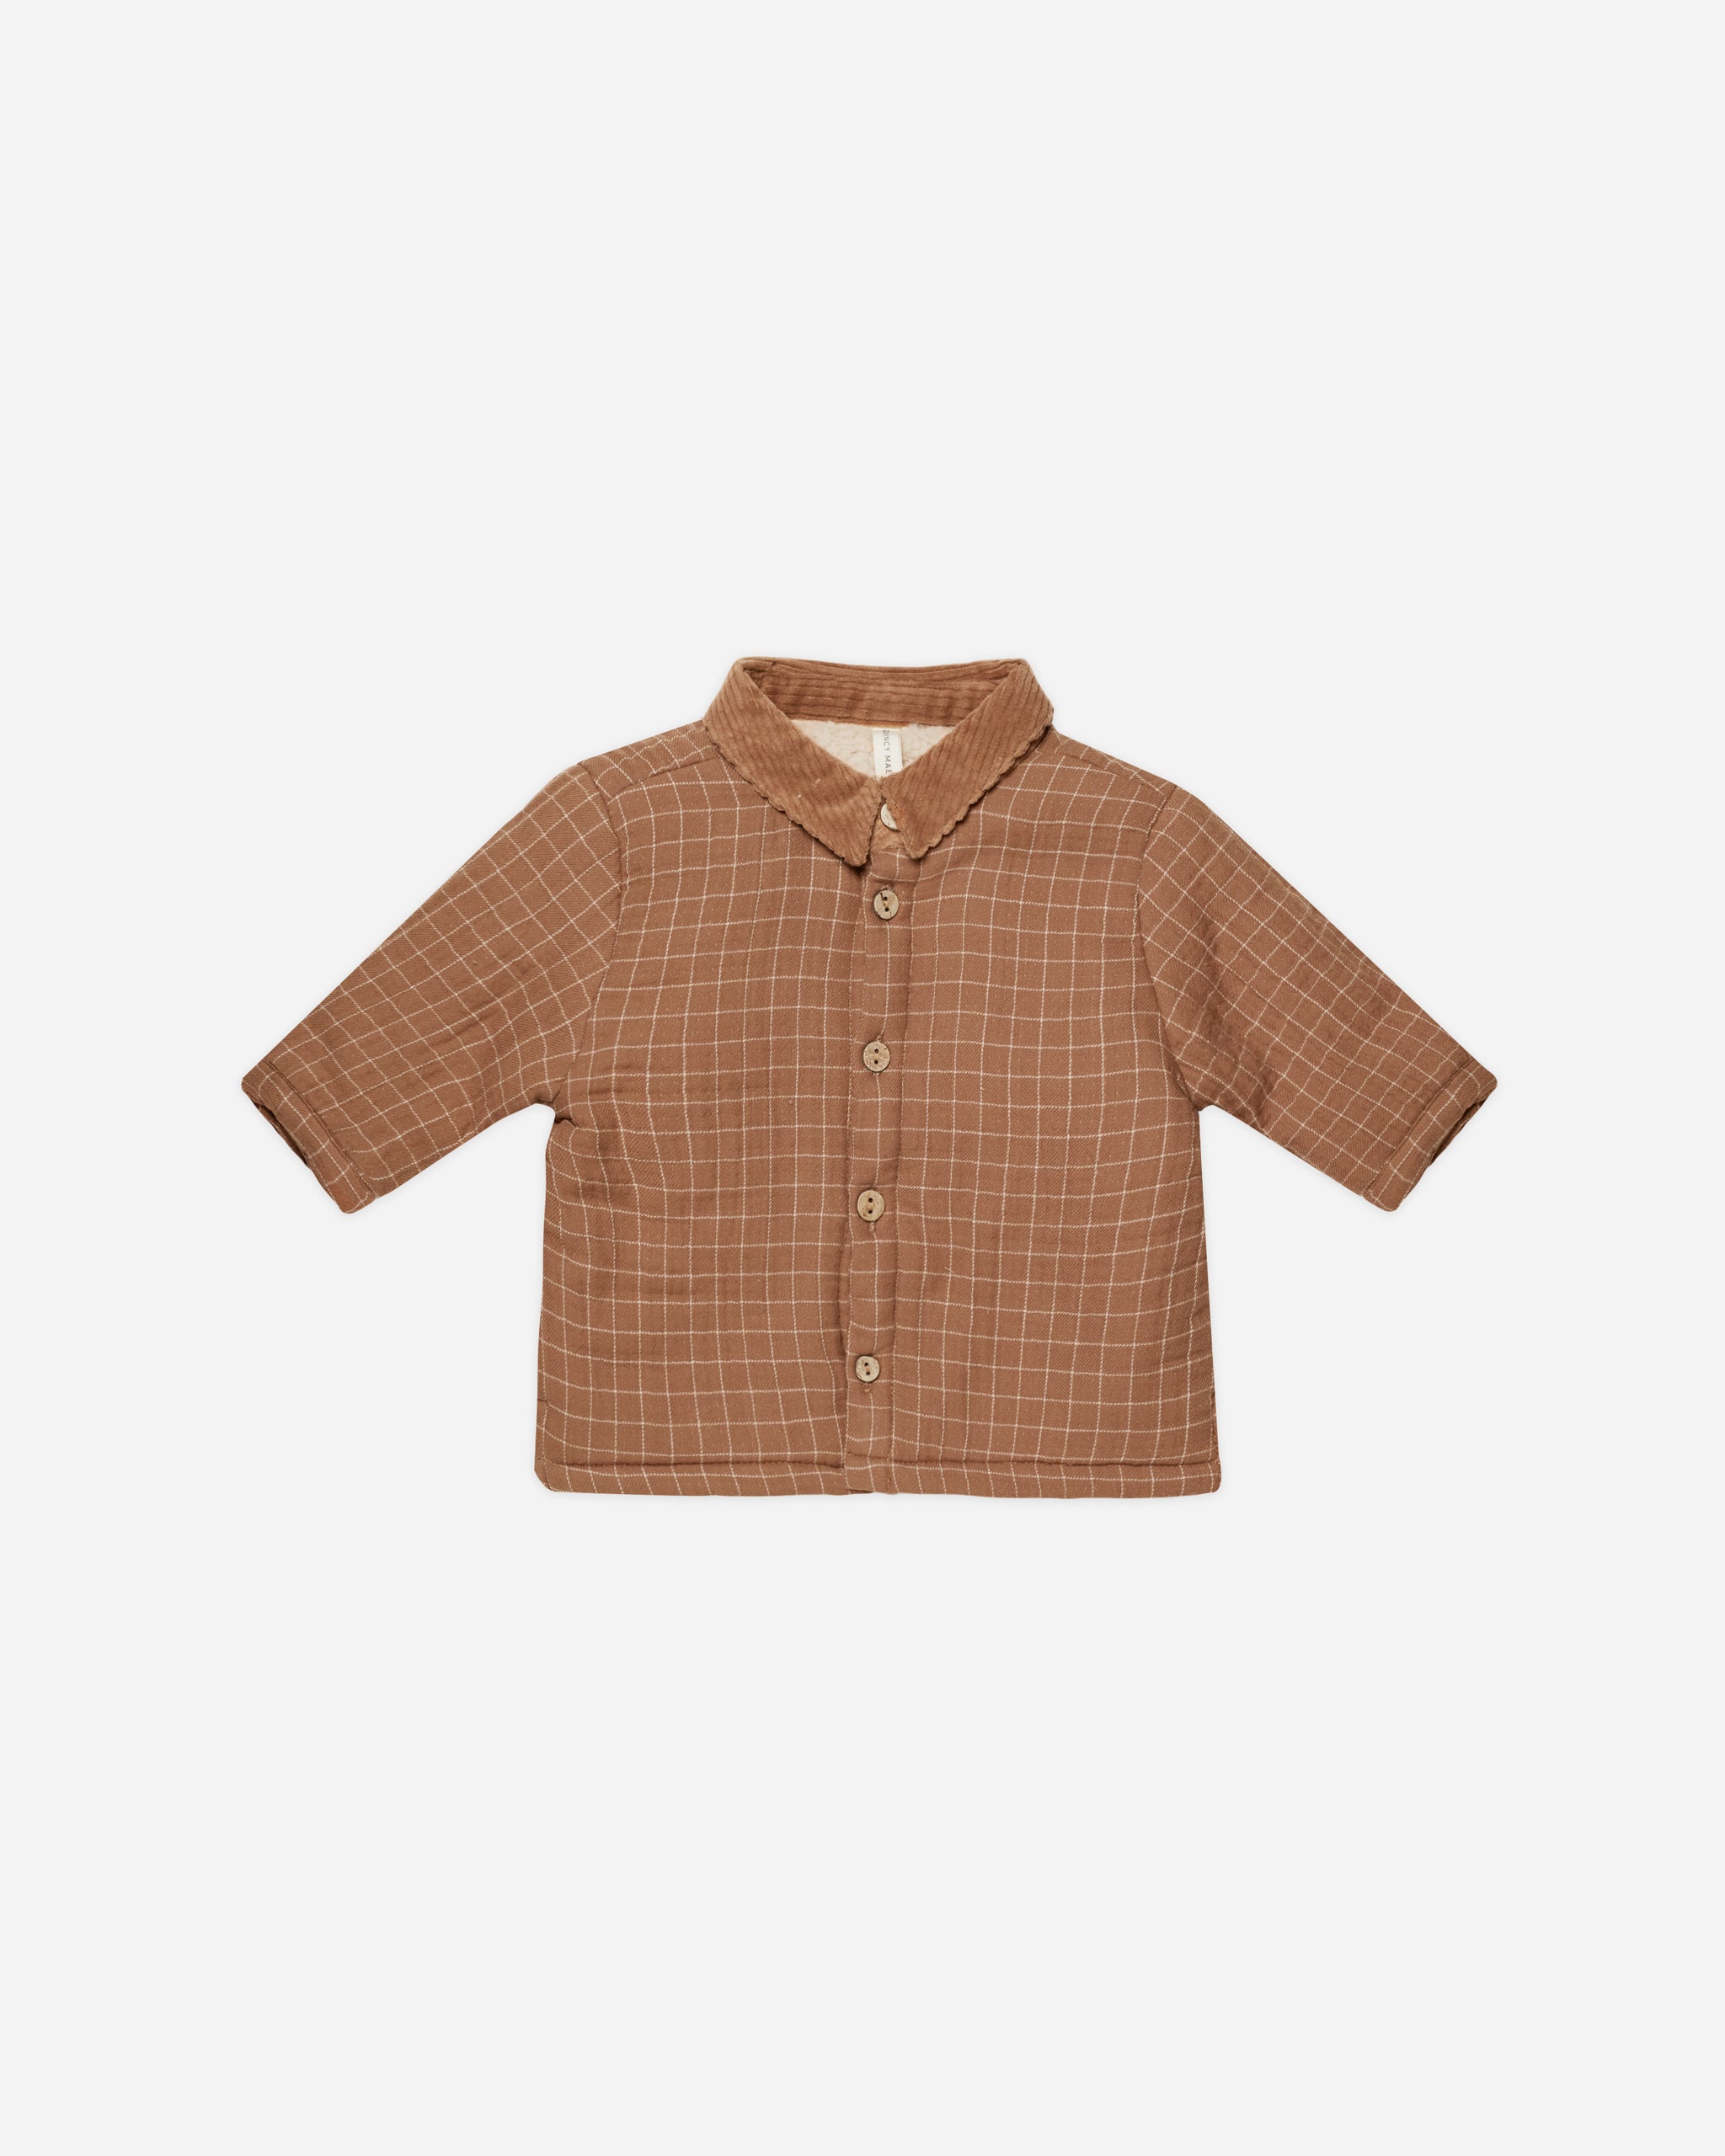 Ford Jacket || Cinnamon Grid - Rylee + Cru | Kids Clothes | Trendy Baby Clothes | Modern Infant Outfits |